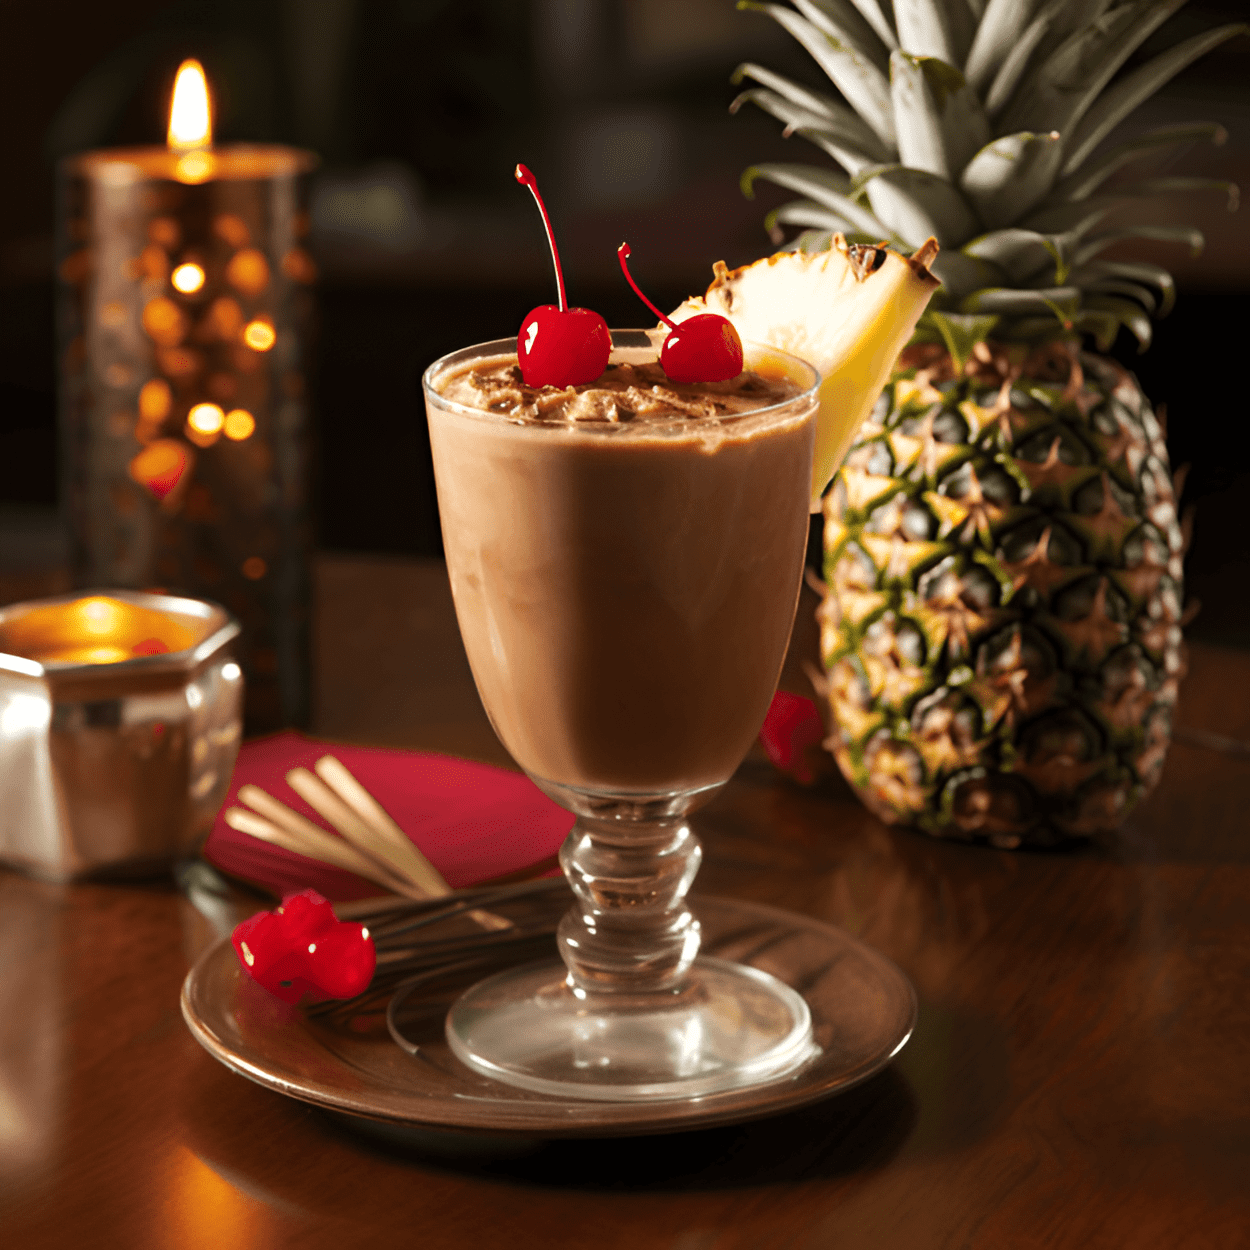 Chocolate Piña Colada Cocktail Recipe - The Chocolate Piña Colada is a sweet, creamy, and indulgent cocktail. The rich taste of chocolate blends perfectly with the tropical flavors of pineapple and coconut. It's a smooth and velvety drink with a hint of rum's warmth.